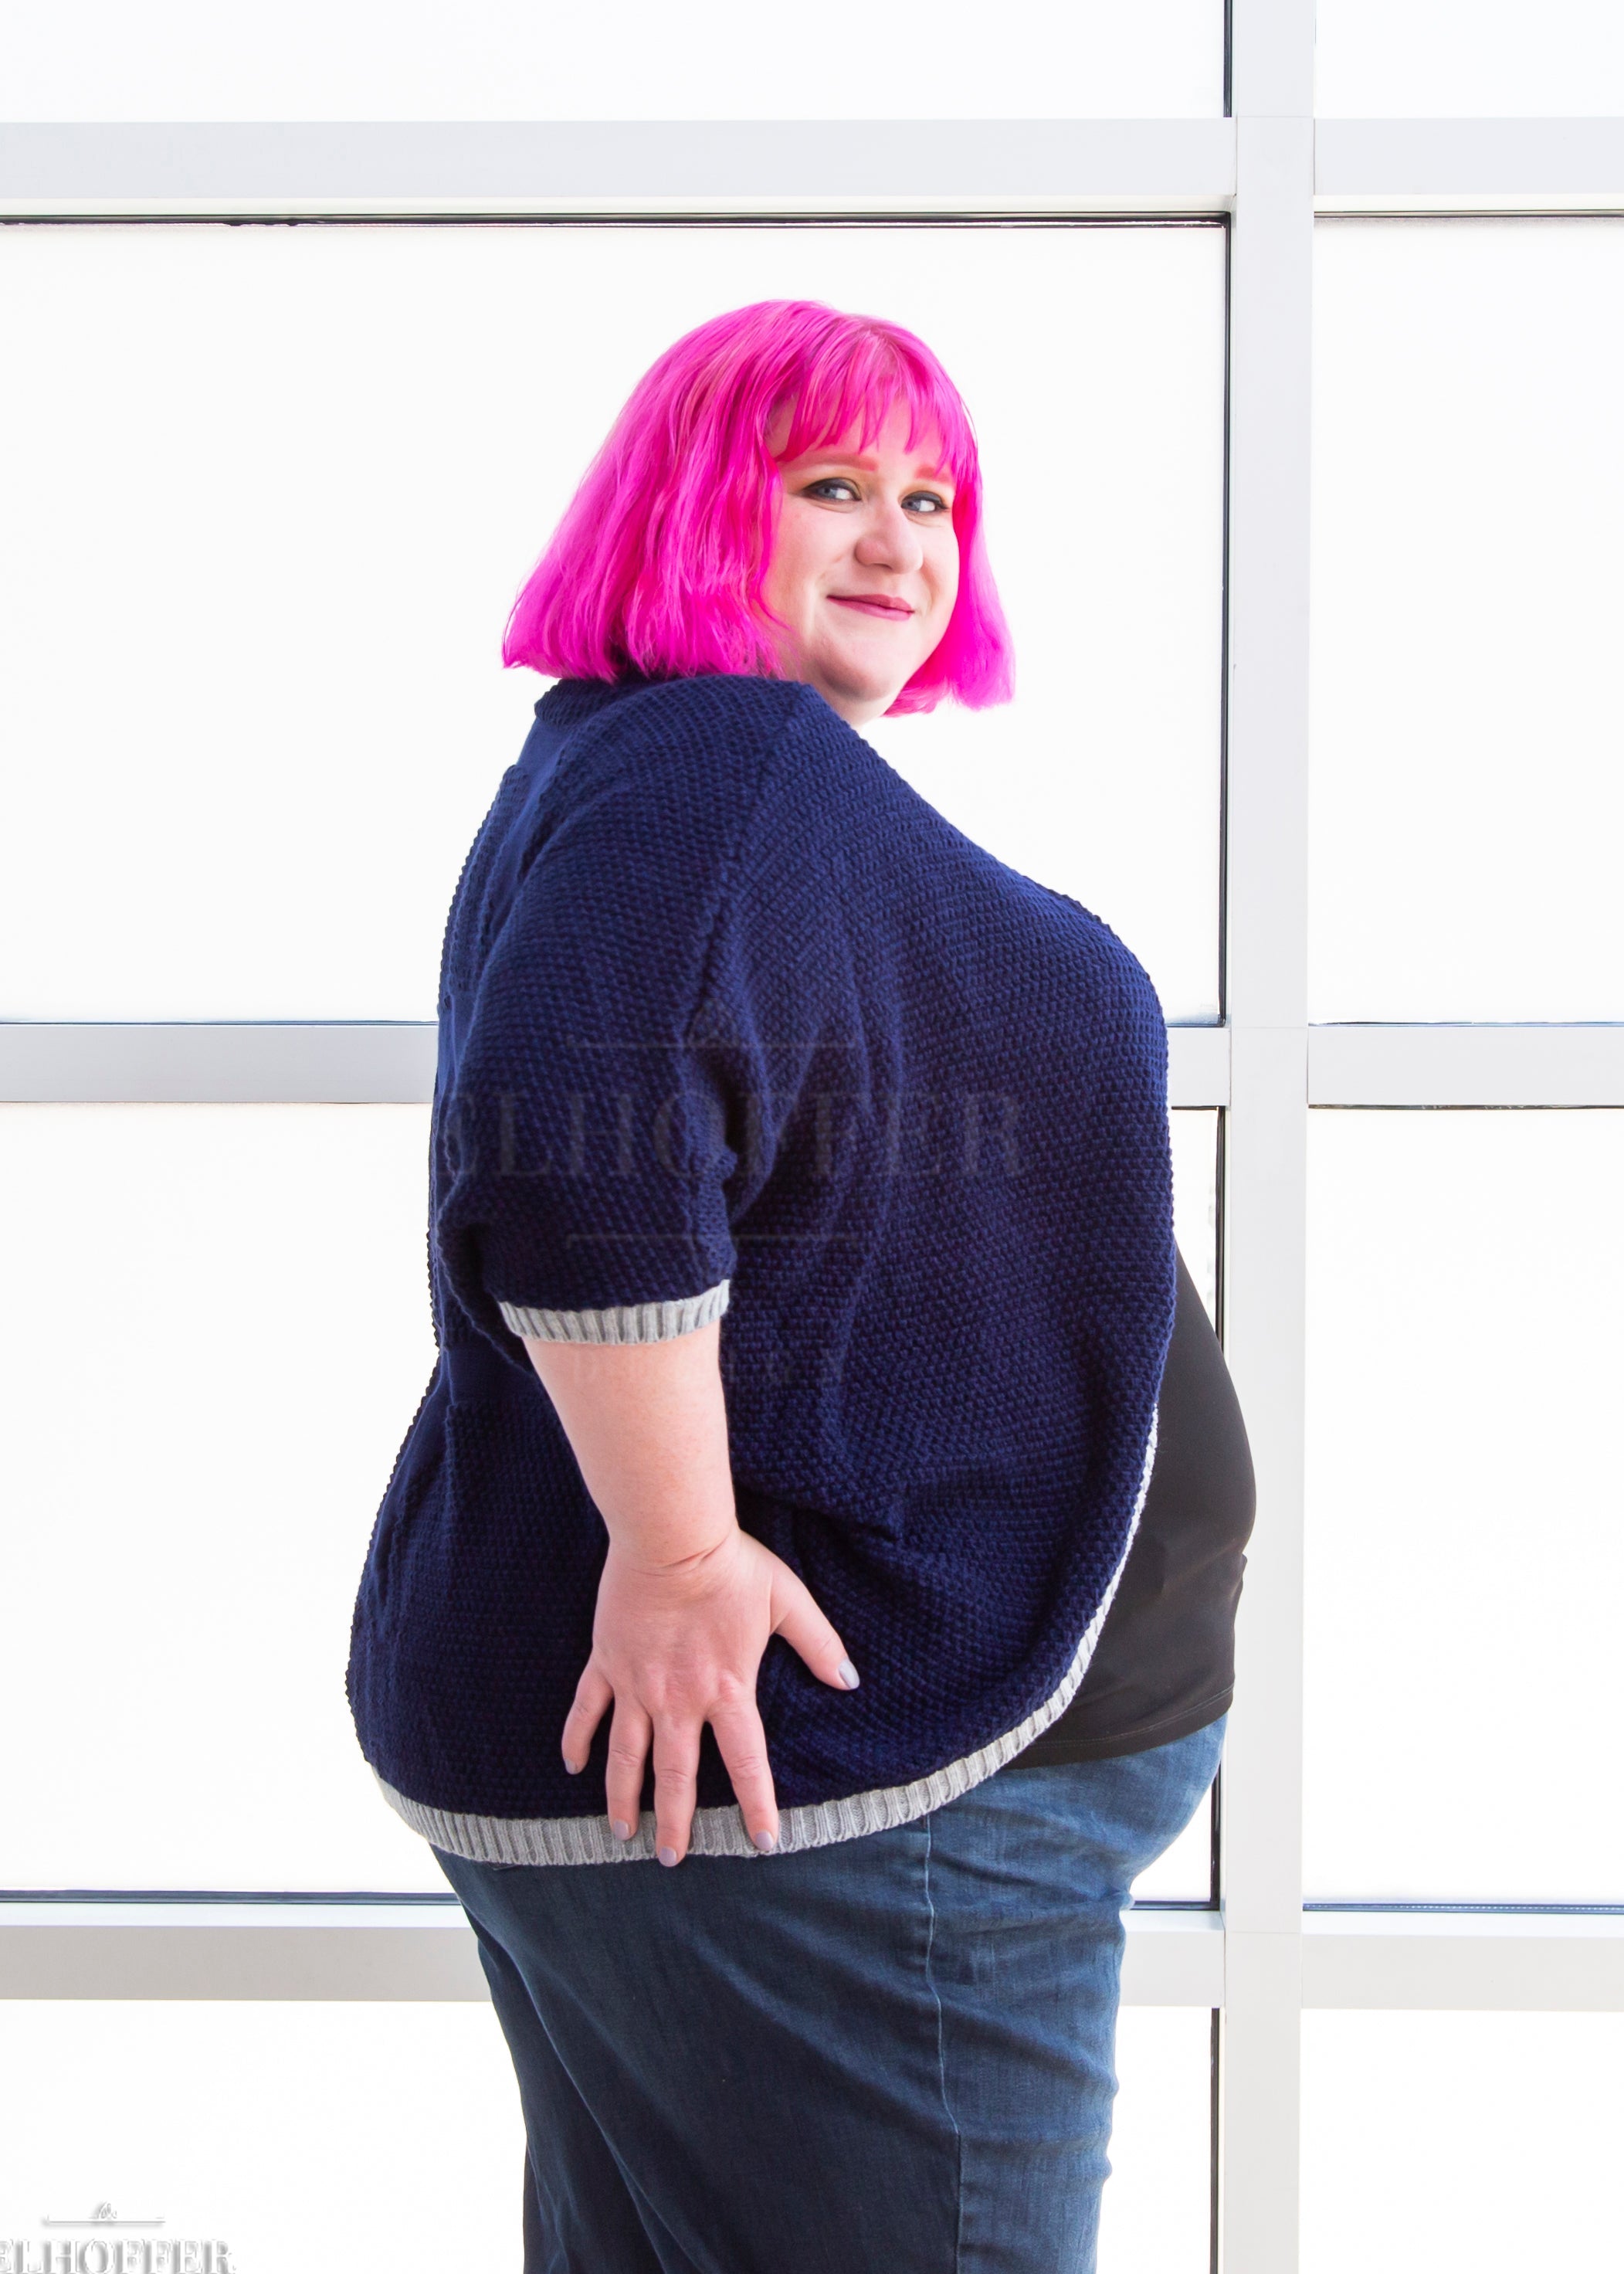 Logan, a fair skinned 3xl model with short bright pink hair with bangs, is wearing a dark blue loose knit dolman with light grey ribbing around edges and cuffs. The dolman features 3/4 length sleeves and a magical script design (circle with T crossing through the circle) on the back.